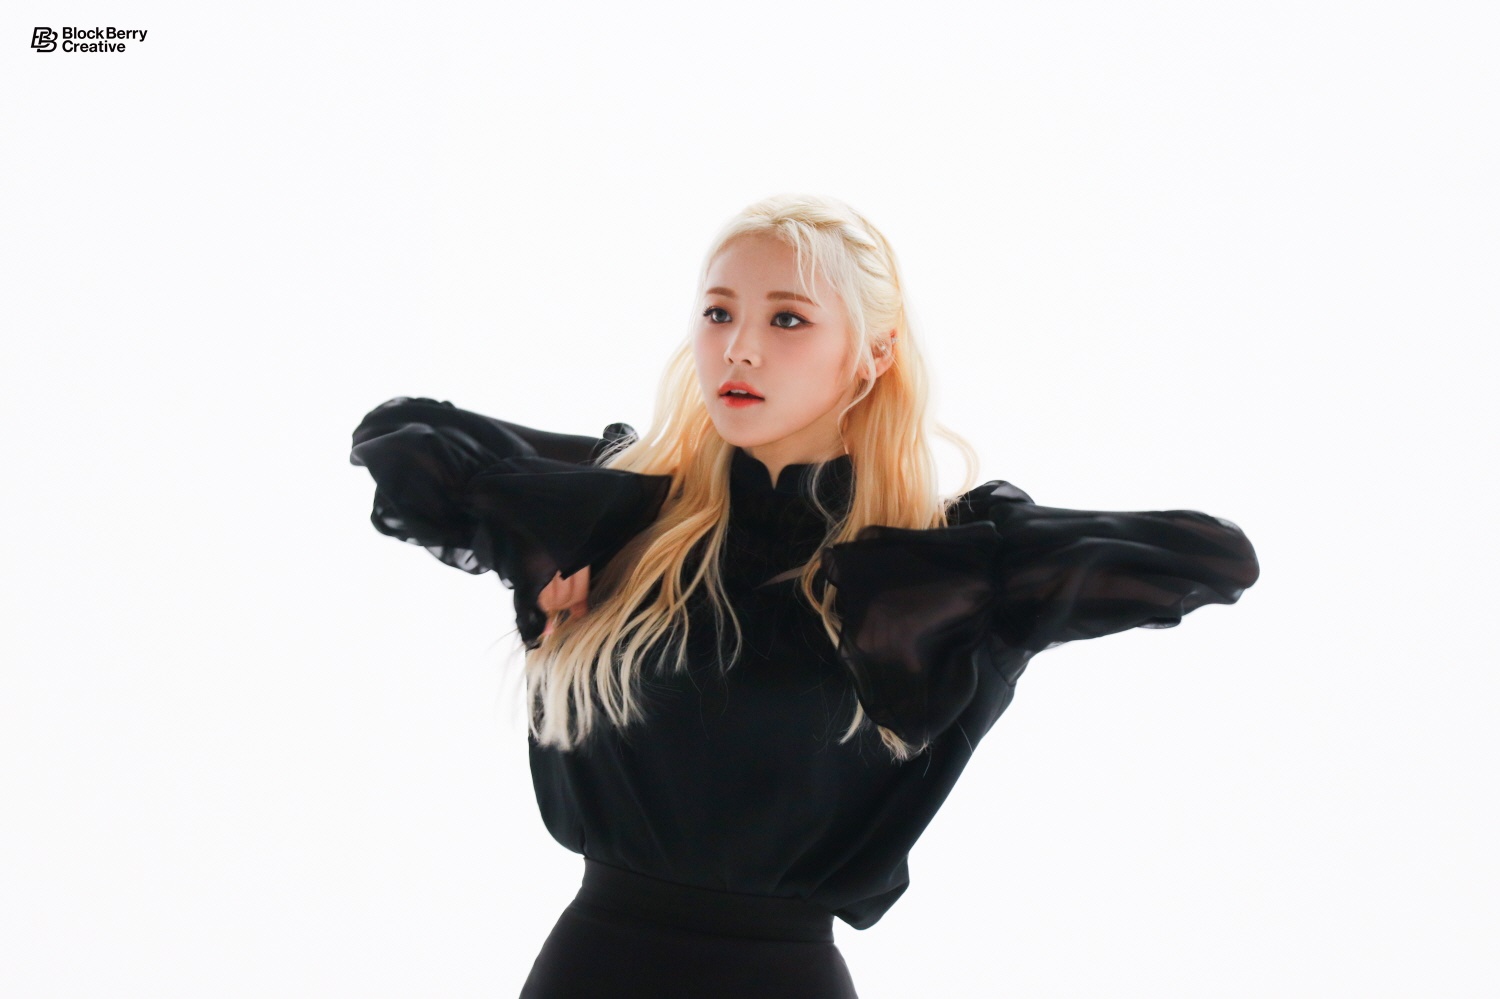 LOONA 'Butterfly' MV behind - Jinsoul - LOOΠΔ Photo (42659962) - Fanpop -  Page 2